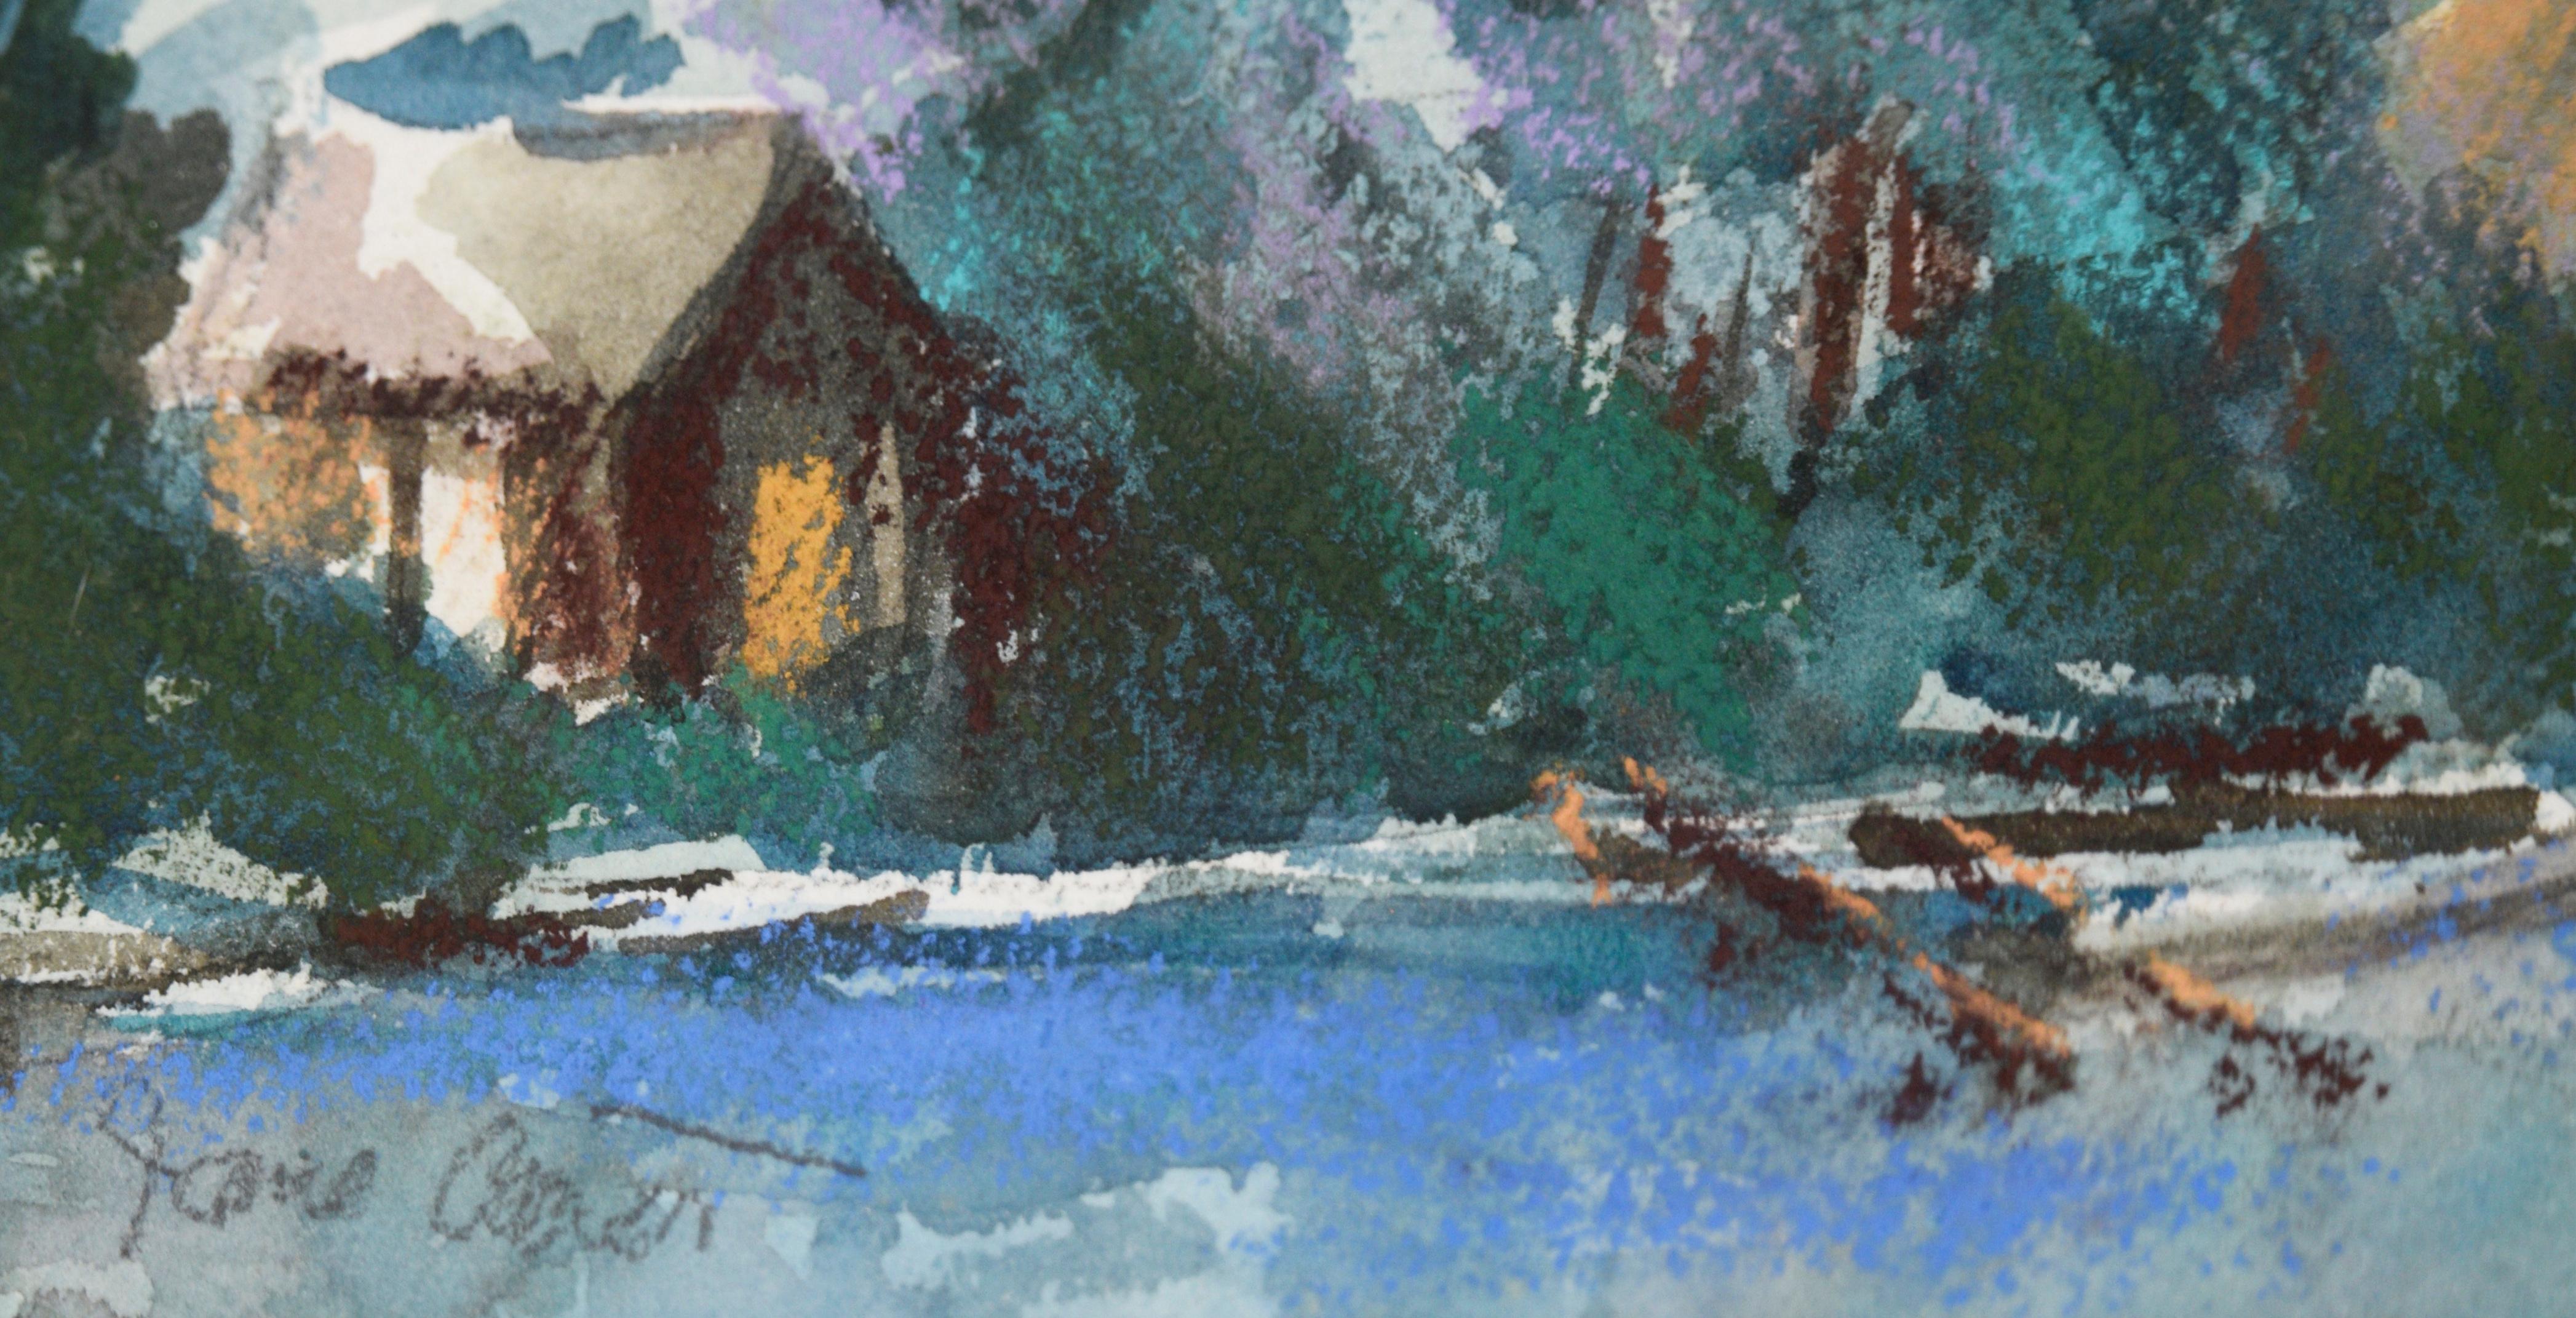 Lakeside Cabin - Pastel and Watercolor on Paper

Watercolor and pastel painting depicting two wood cabins along the lakeside. Vibrant green trees surround the cabins, with hues of blues and purples making up the lake. Light green mountains are